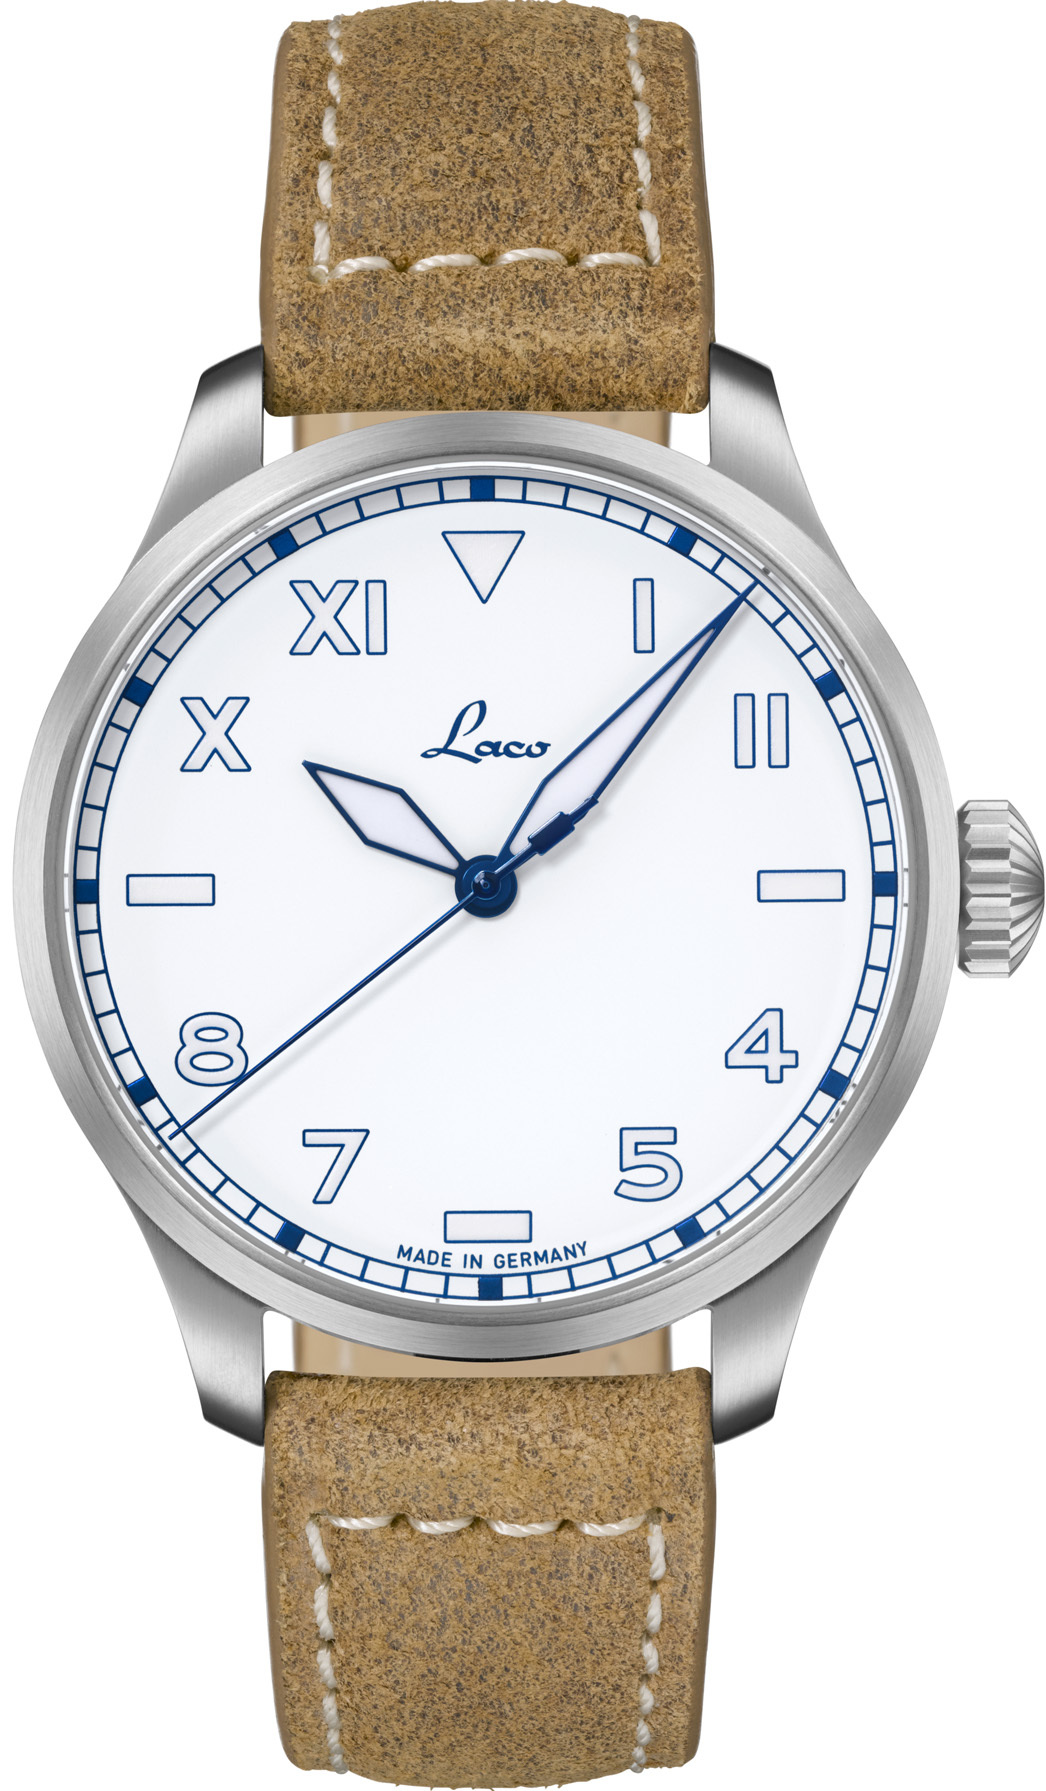 Laco Napa California Dial Limited Edition - Exquisite Timepieces